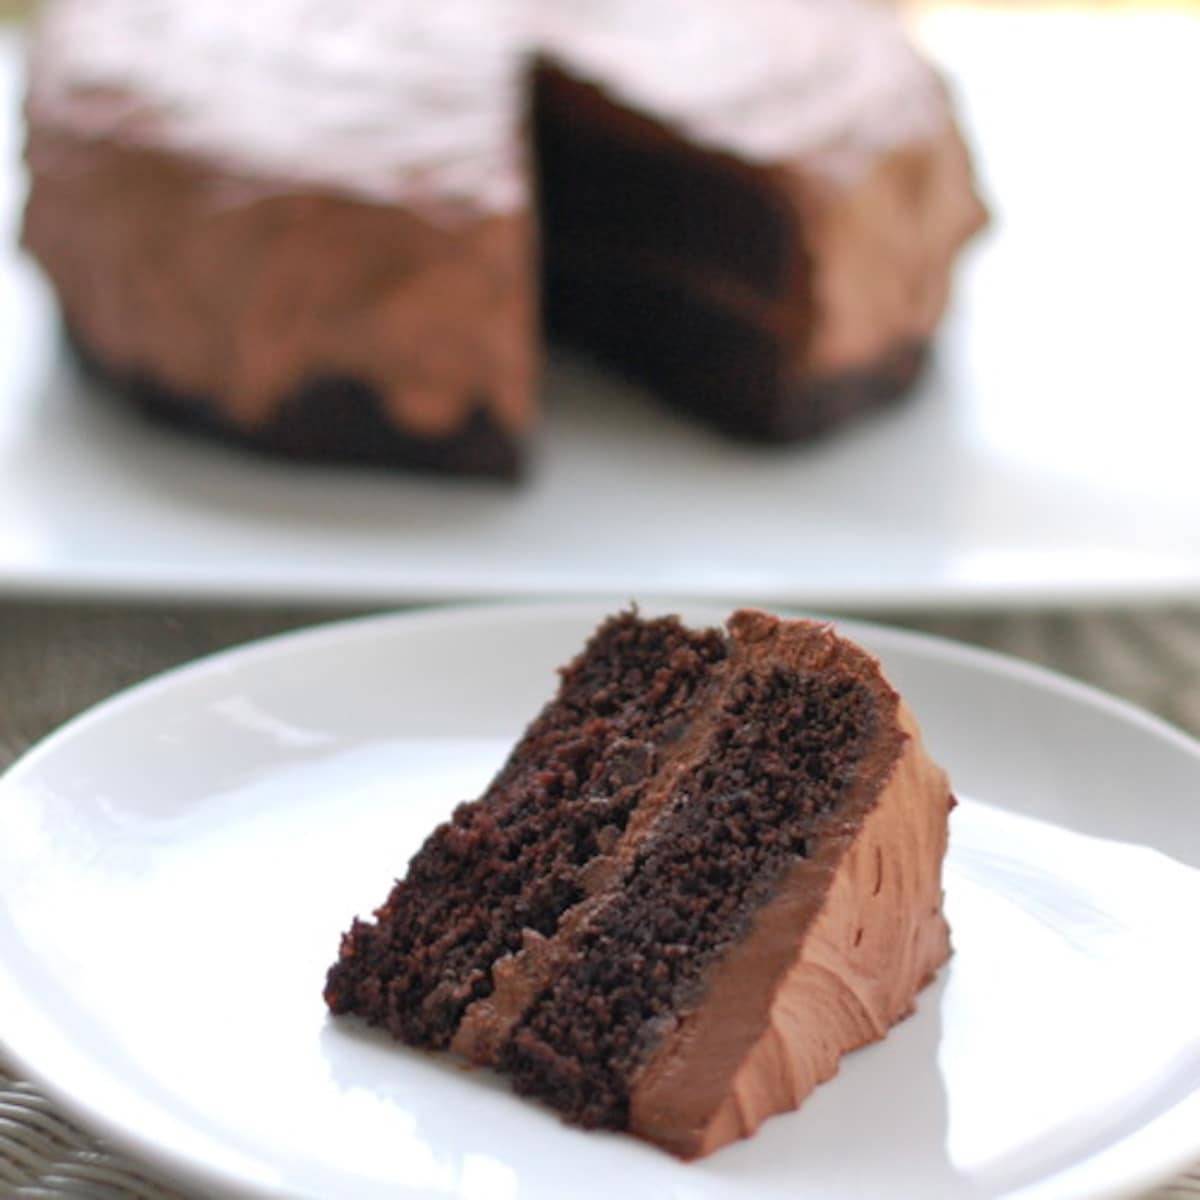 Slice of double chocolate cake with buttercream frosting on a white plate.